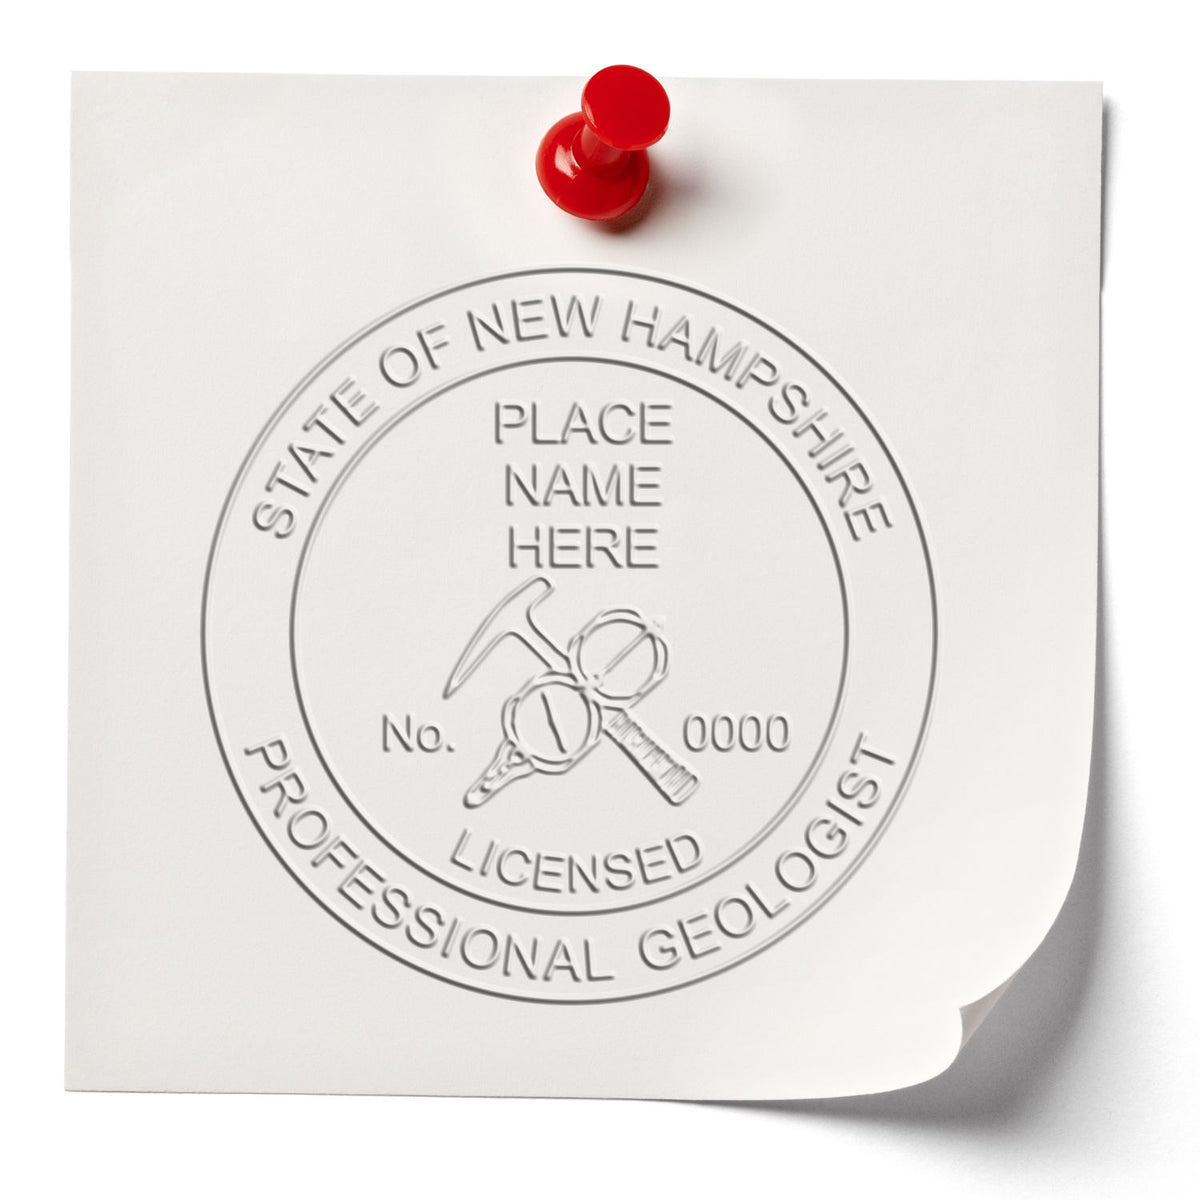 An in use photo of the State of New Hampshire Extended Long Reach Geologist Seal showing a sample imprint on a cardstock